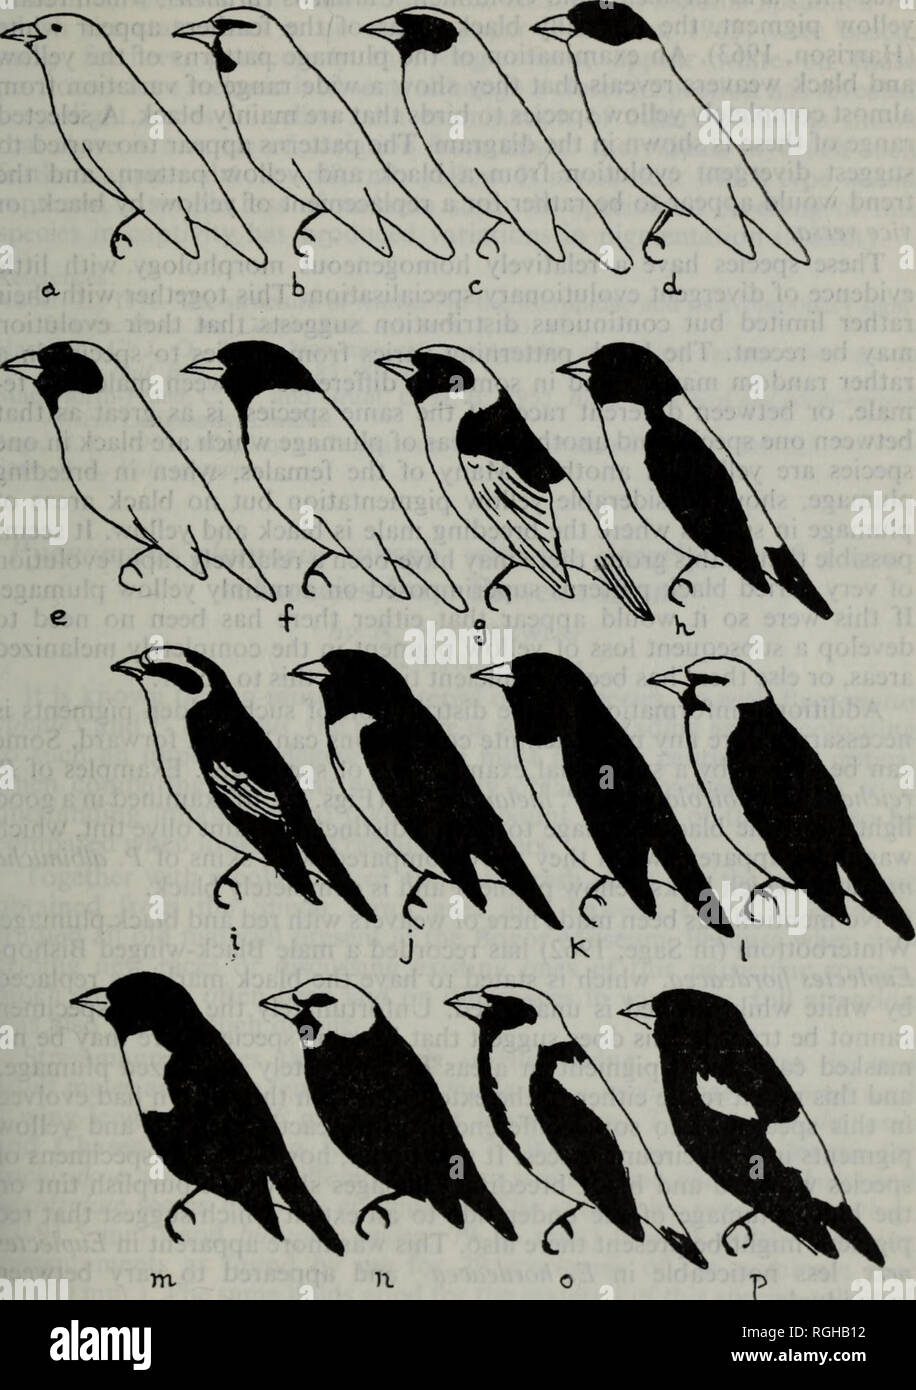 . Bulletin of the British Ornithologists' Club. Bulletin B.O.C. 45 Vol. 85. Diagrammatic representation of the breeding plumages of some yellow and black weavers. (a) Ploceus xanthops. (b) P. ocularis, (c) P. spekeoides. (d) P. stuhlmanni. (e) P. pelzelni. (f) P. alienus. (g) P. mgrtmentum. (h) P. insignis .. (i) P. reichenowi. (j) P. bicolor. (k) P. gokuuli. (I) P. nigricollis. (m) Malimhus rachcliac. (n) P. mehnogaster. (o) Euplectes afro, (p) E. capensis.. Please note that these images are extracted from scanned page images that may have been digitally enhanced for readability - coloration  Stock Photo